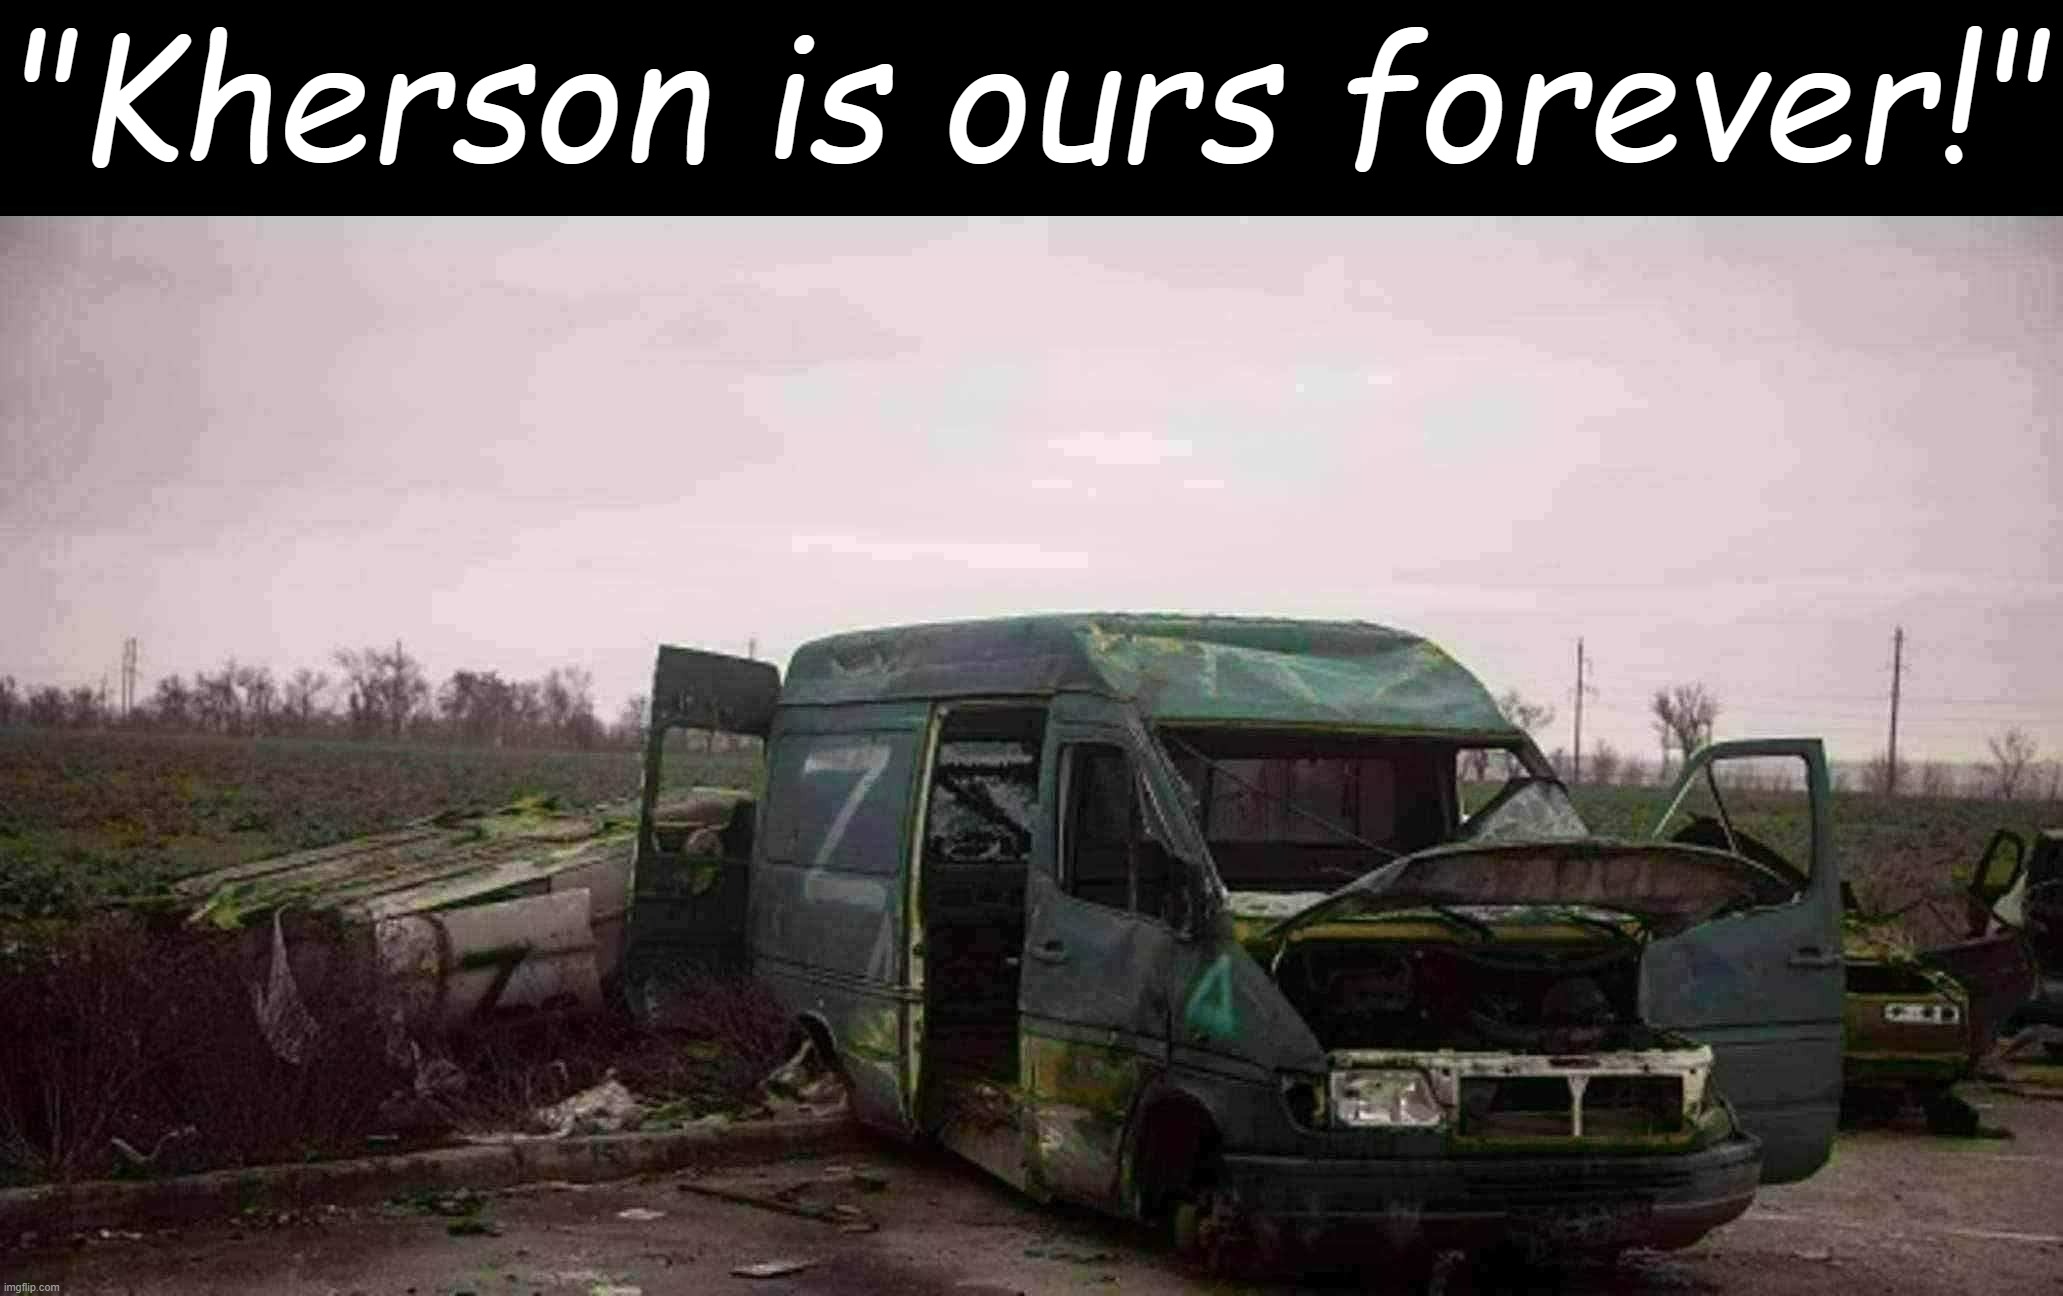 Russian van abandoned outside Kherson | "Kherson is ours forever!" | image tagged in russian van abandoned outside kherson | made w/ Imgflip meme maker